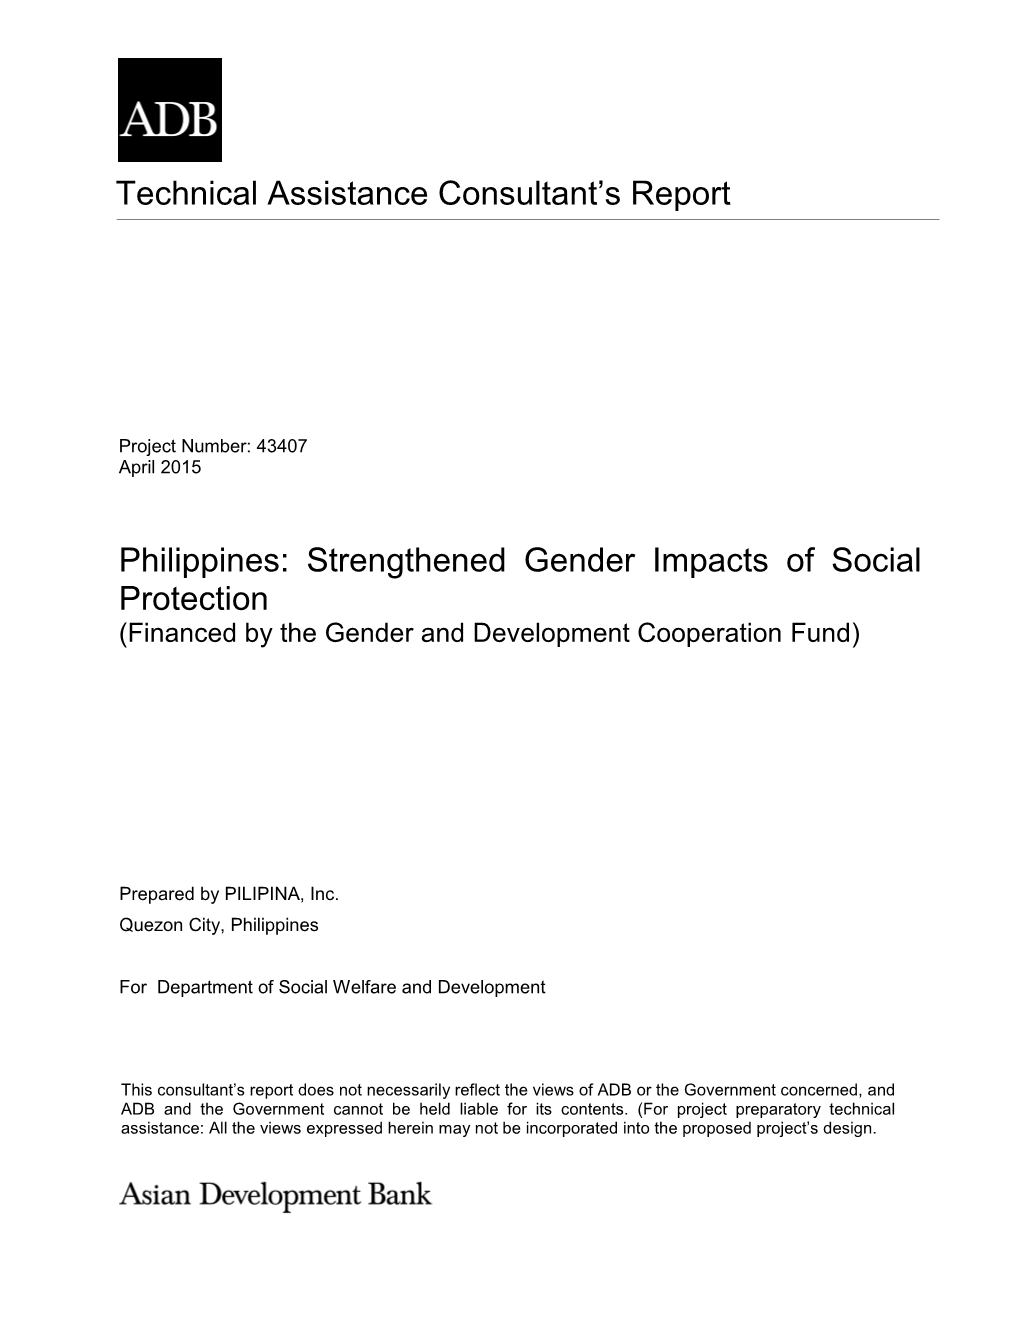 43407-013: Strengthened Gender Impacts